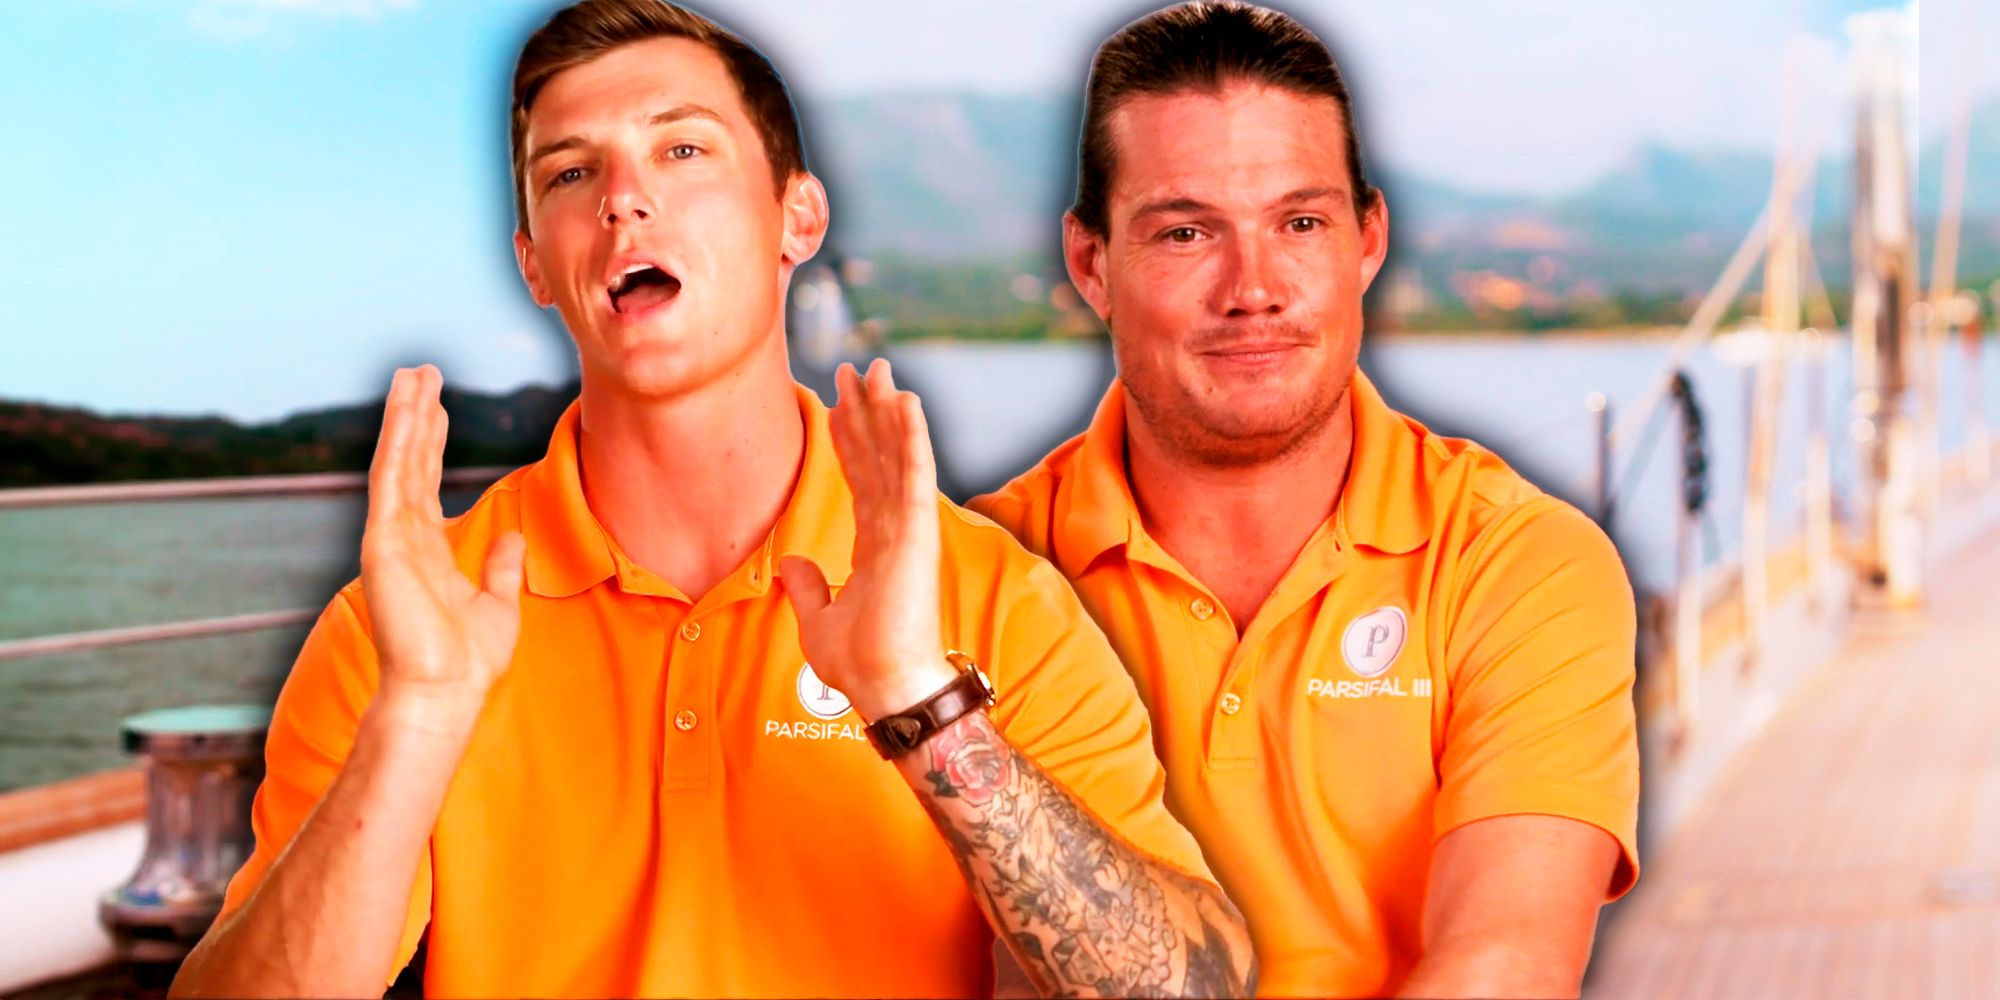 Below Deck's Chase Lemacks and Gary King, both wearing orange outfits